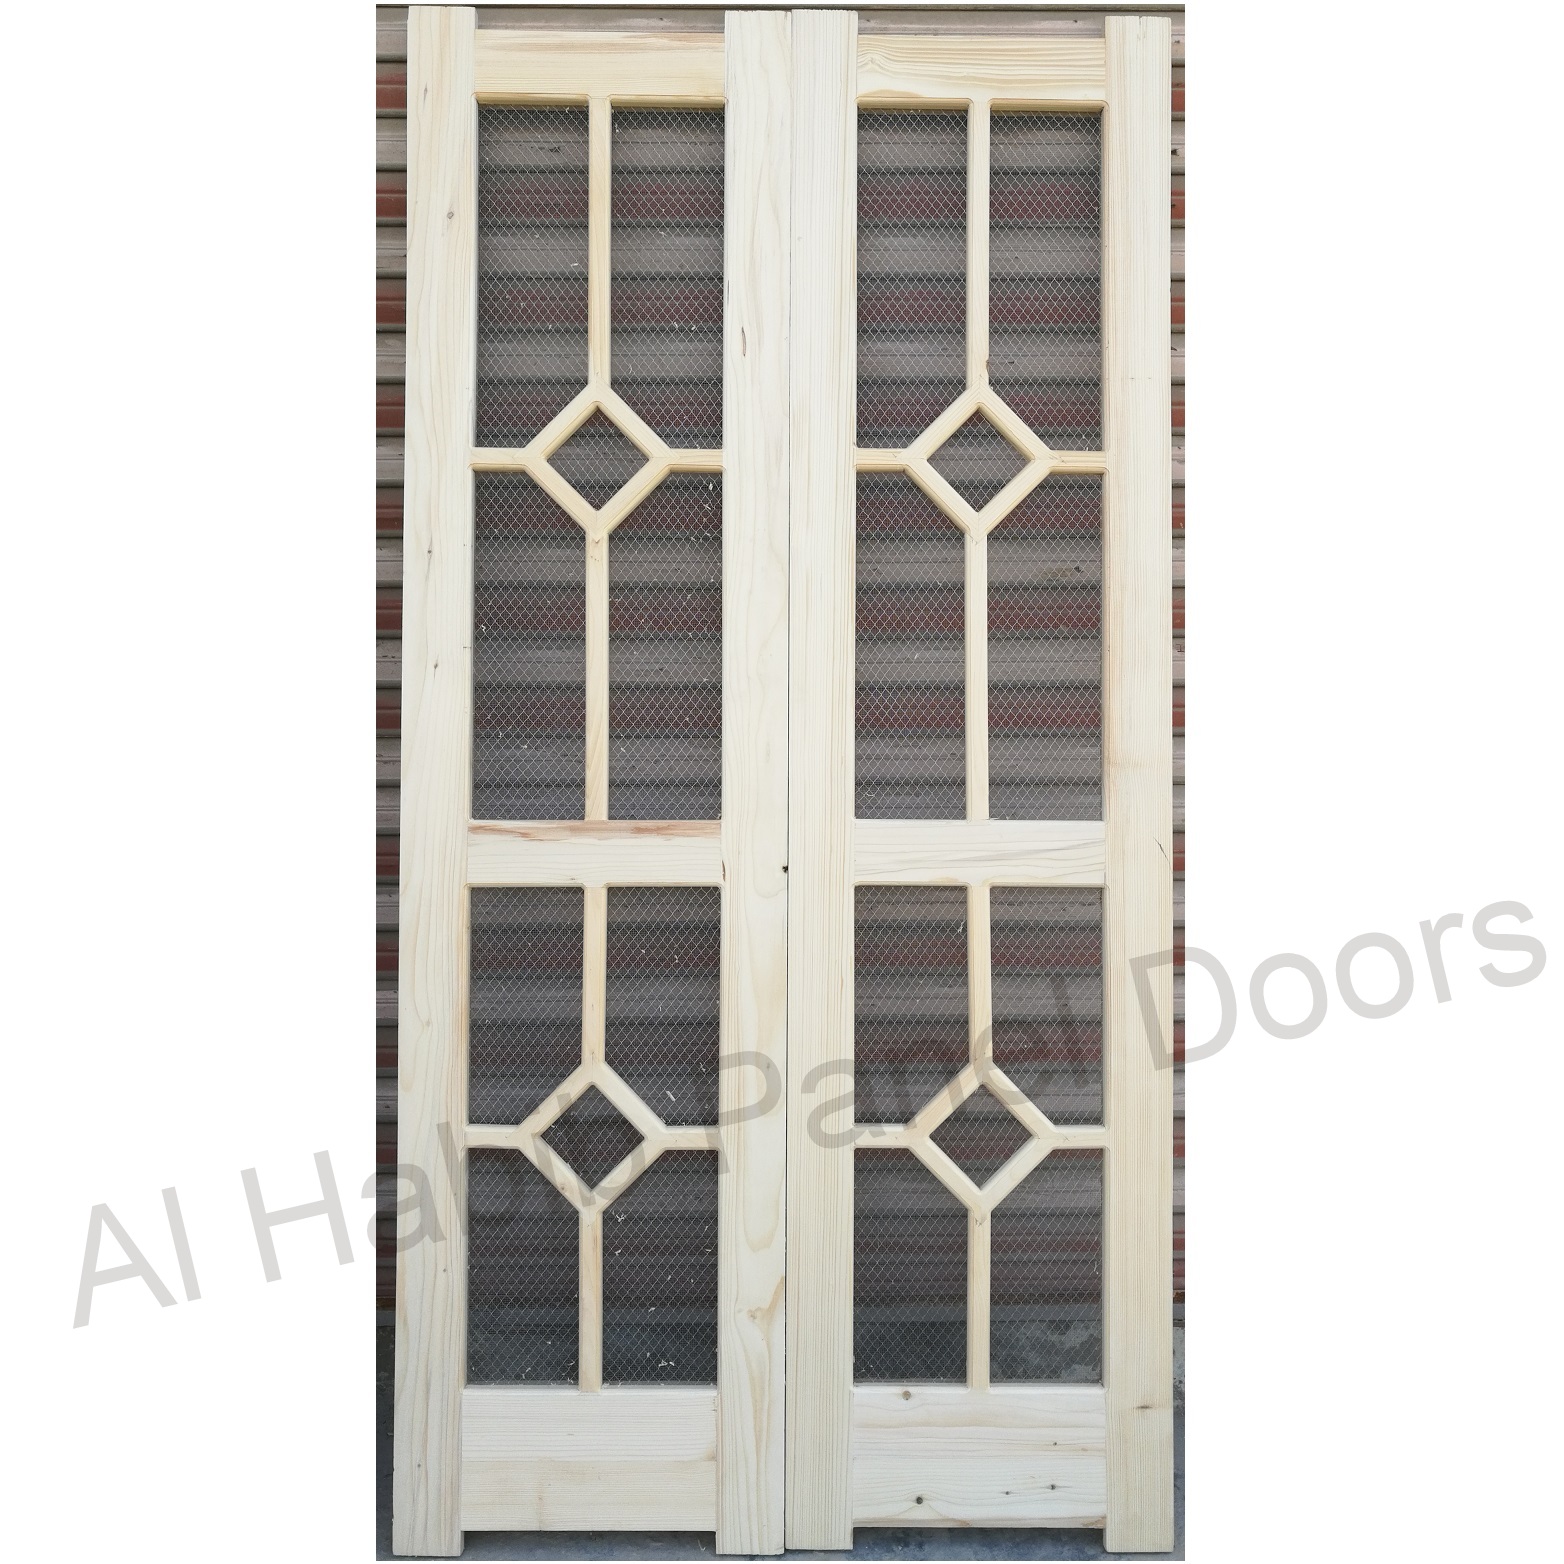 Imported Kail Wood Wire Mesh Double Door Design